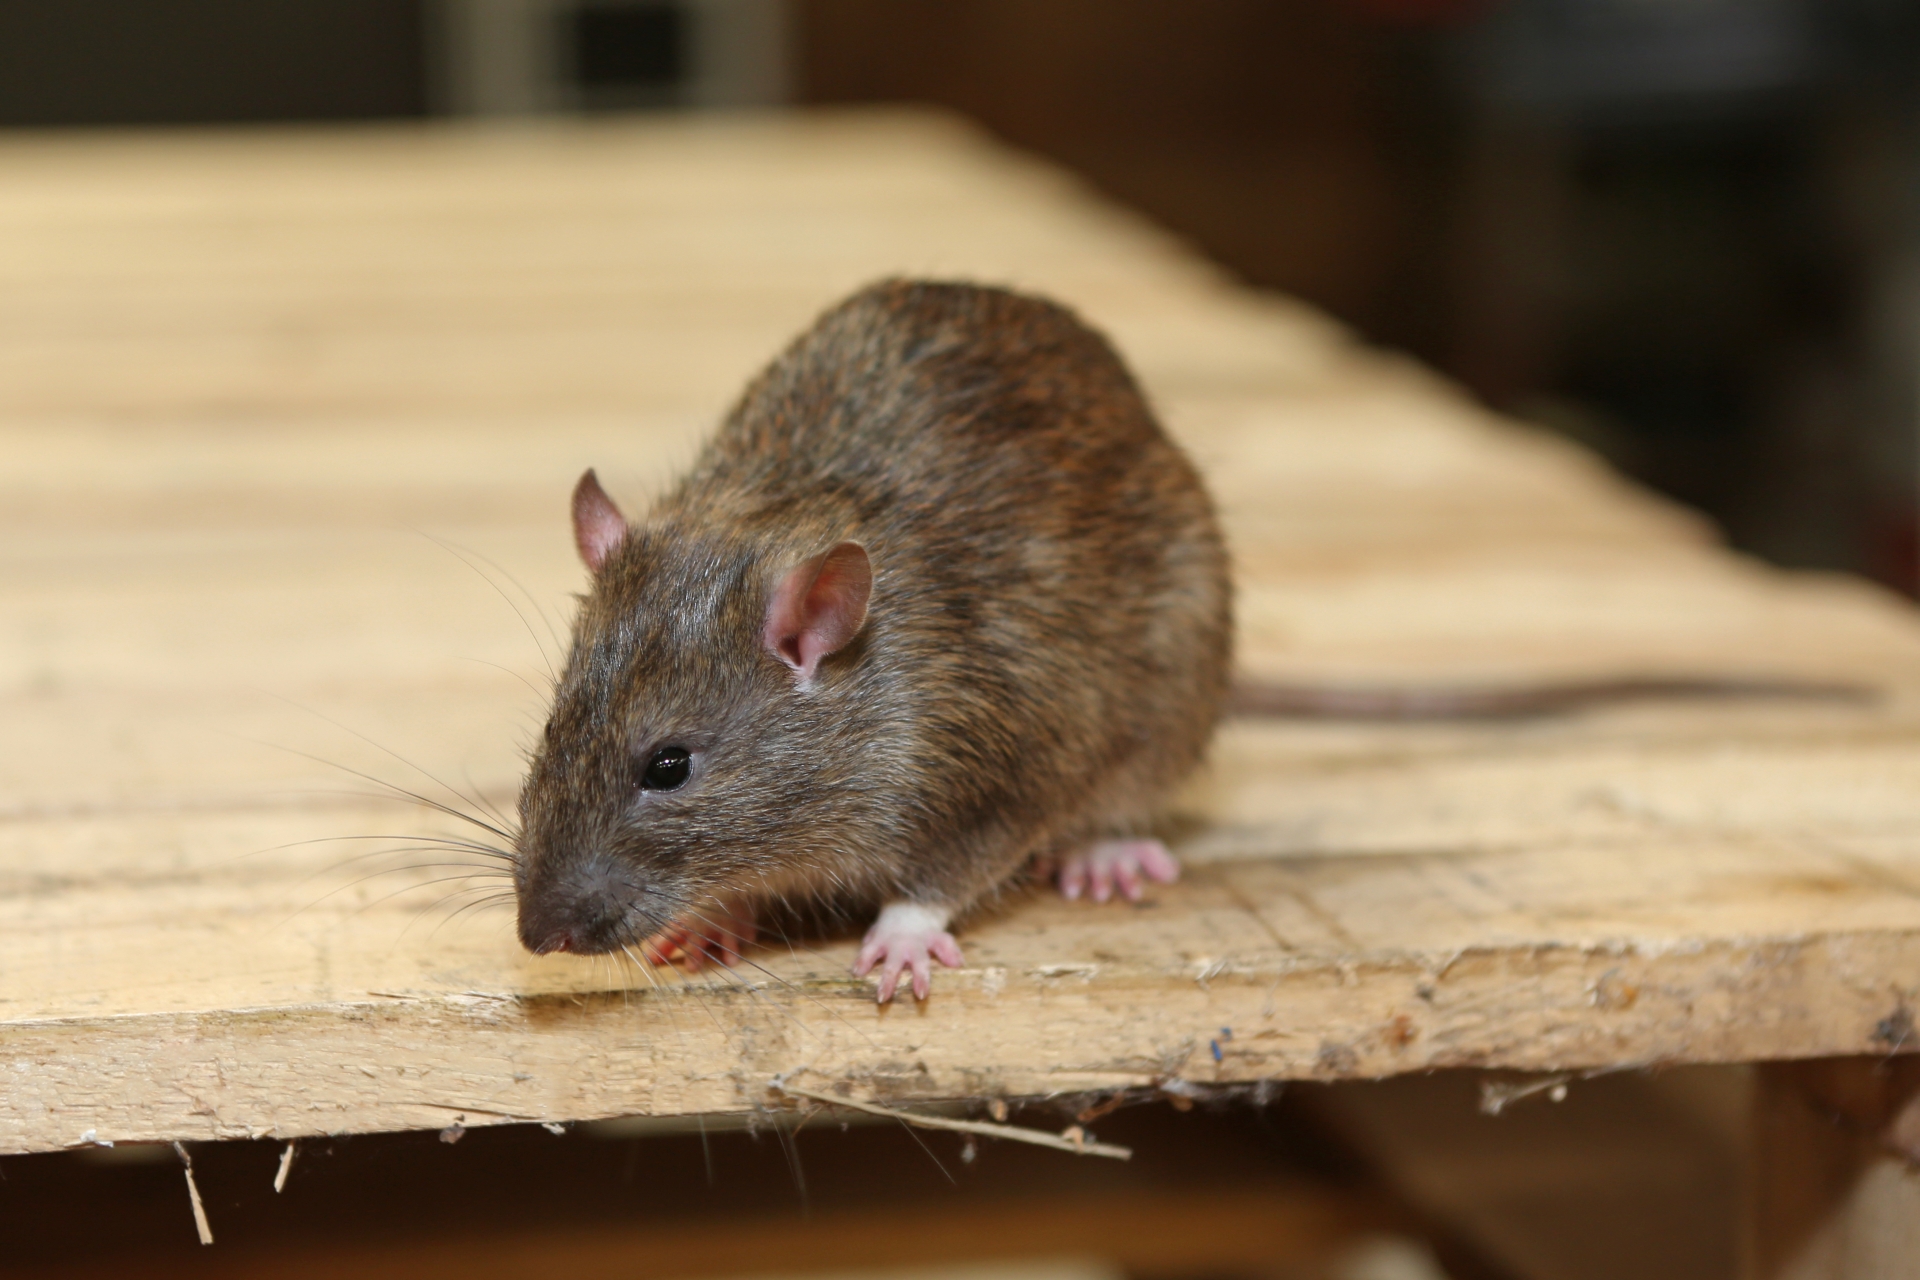 Rat Infestation, Pest Control in Orpington, Chelsfield, Downe, BR6. Call Now 020 8166 9746